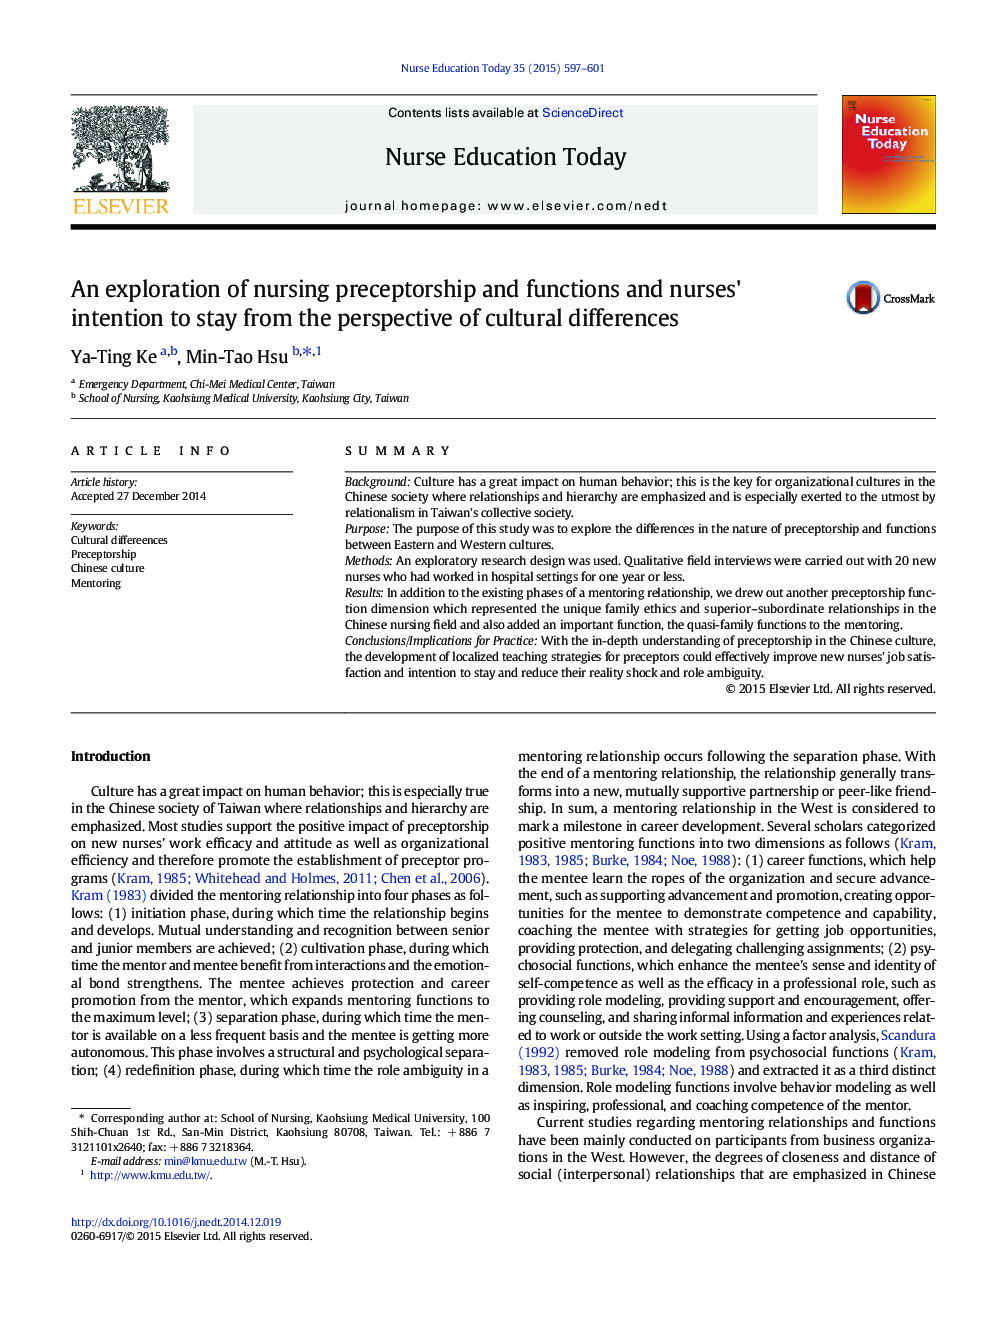 An exploration of nursing preceptorship and functions and nurses' intention to stay from the perspective of cultural differences